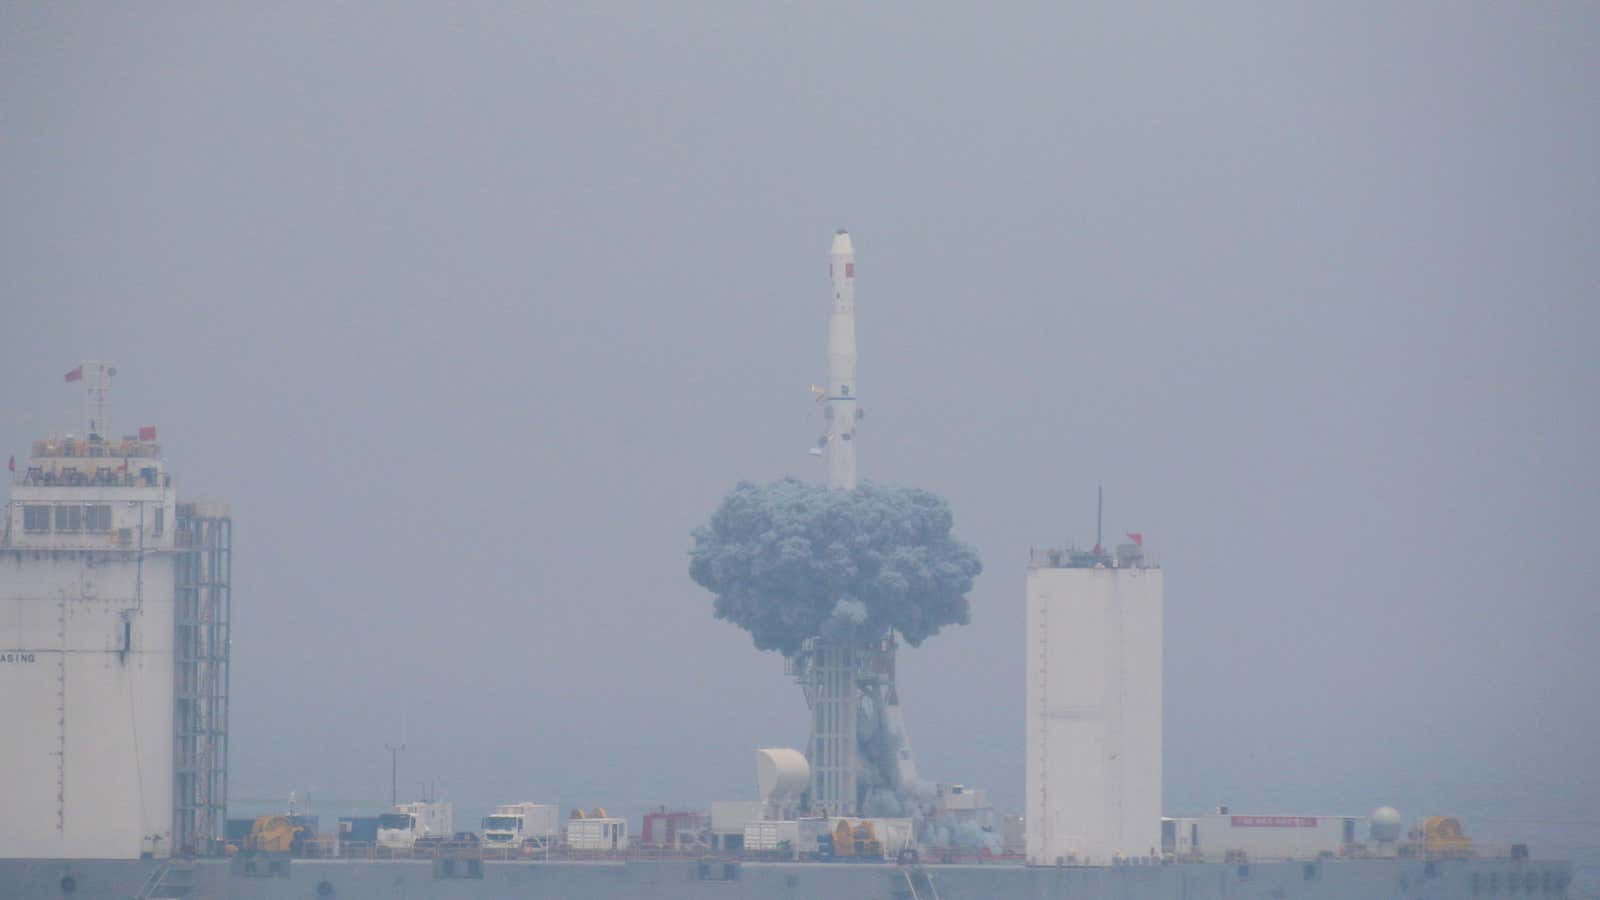 A Long March-11 rocket takes off from an offshore platform in the Yellow Sea off Shandong province, China on June 5.